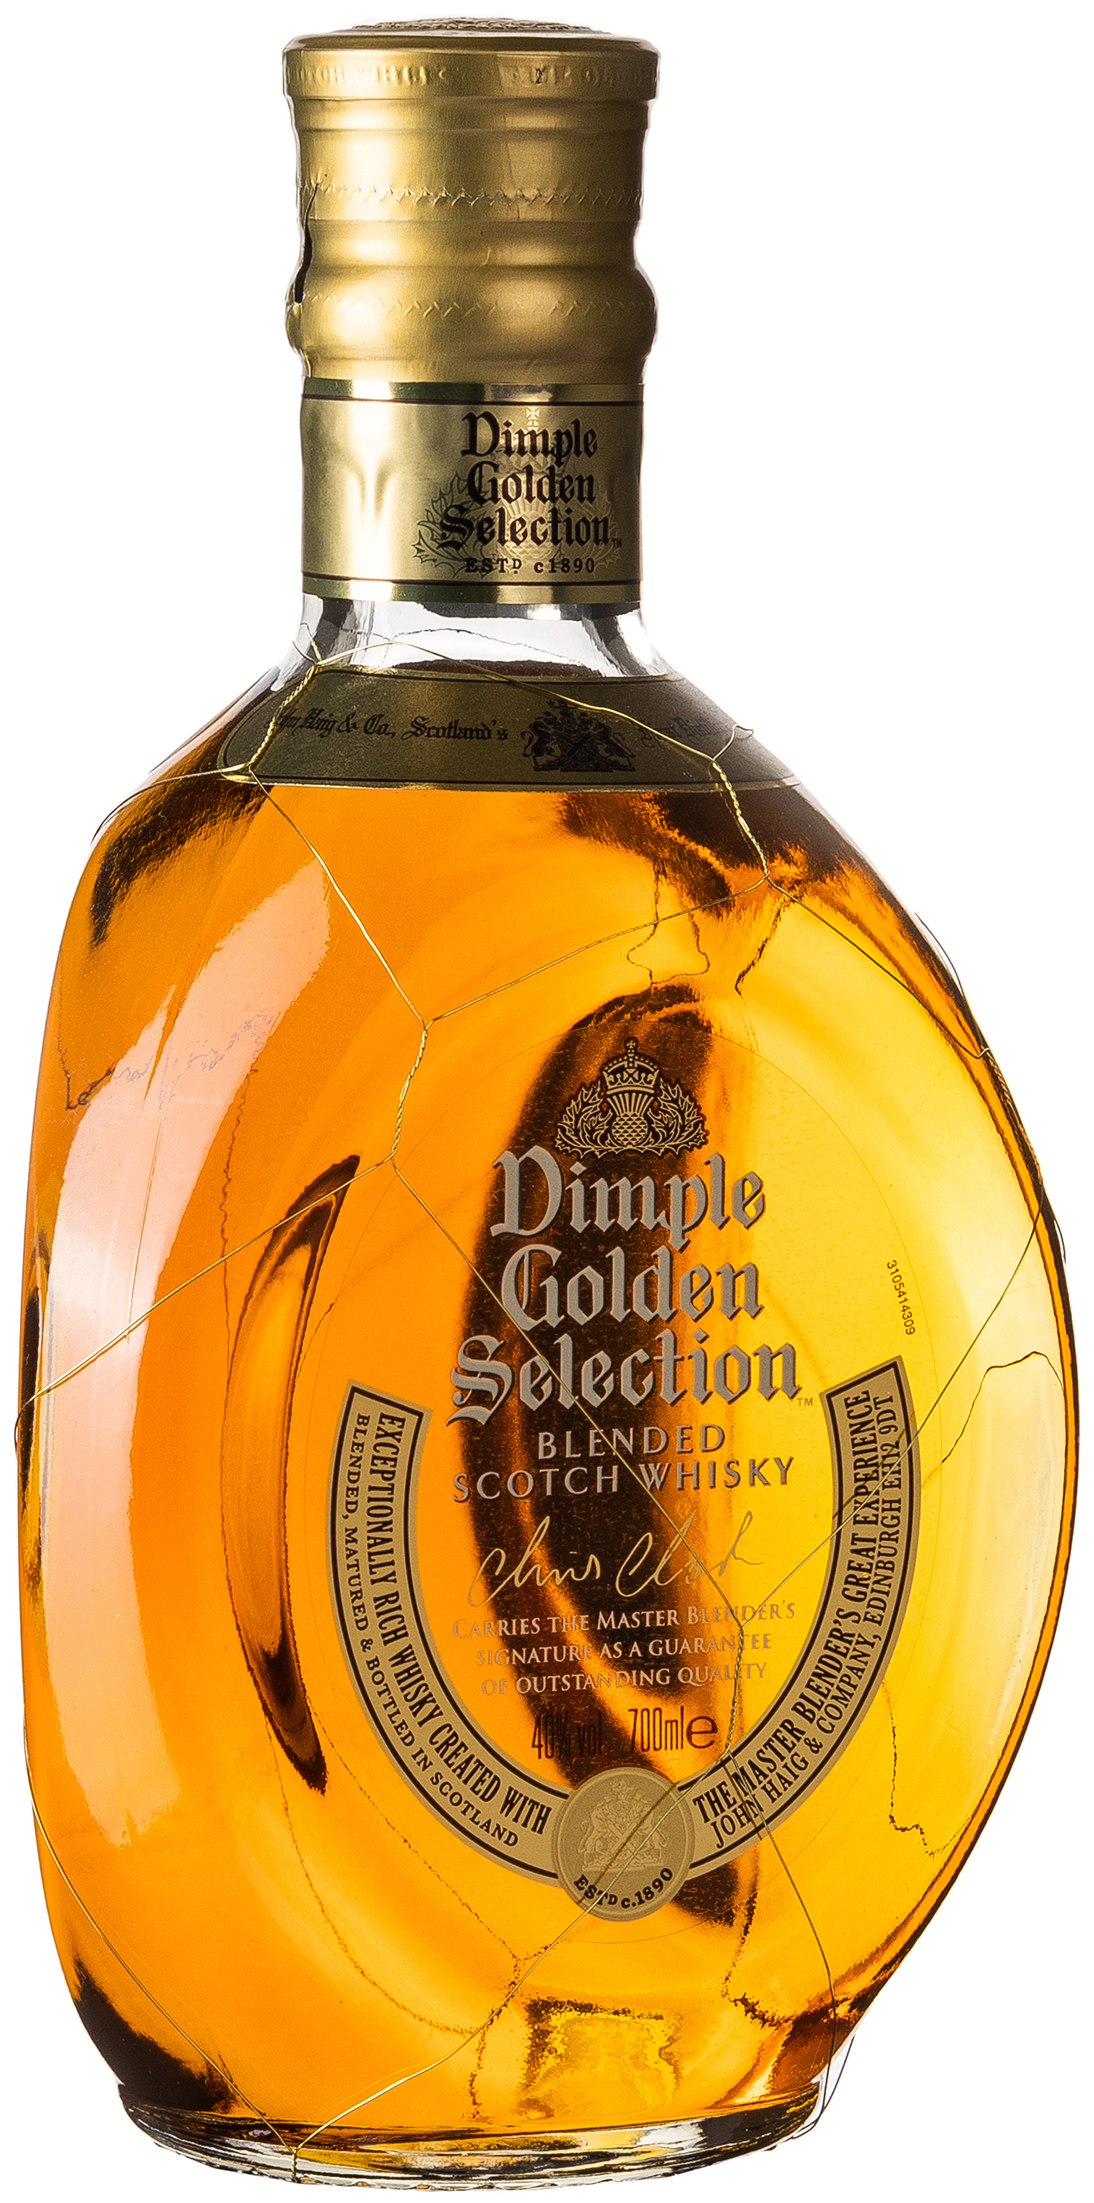 Dimple Gold Selection blended Scotch Whisky 40% vol. 0,7L